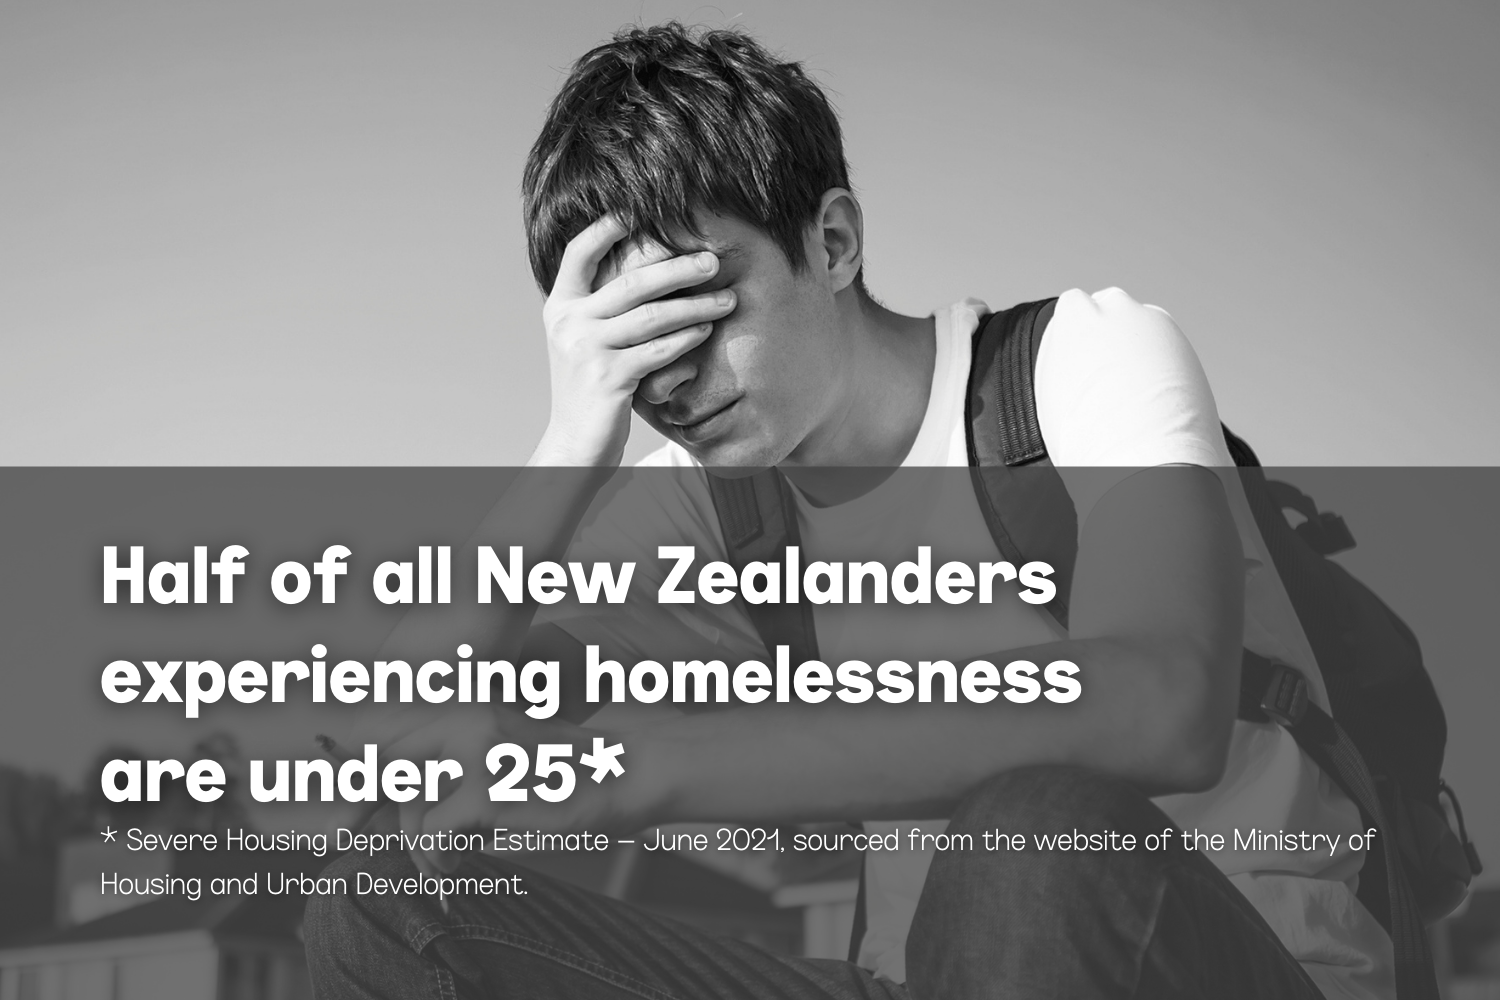 Half of all New Zealanders experiencing homelessness are under 25. Source: Severe Housing Deprivation Estimate – June 2021, sourced from the website of the Ministry of Housing and Urban Development.